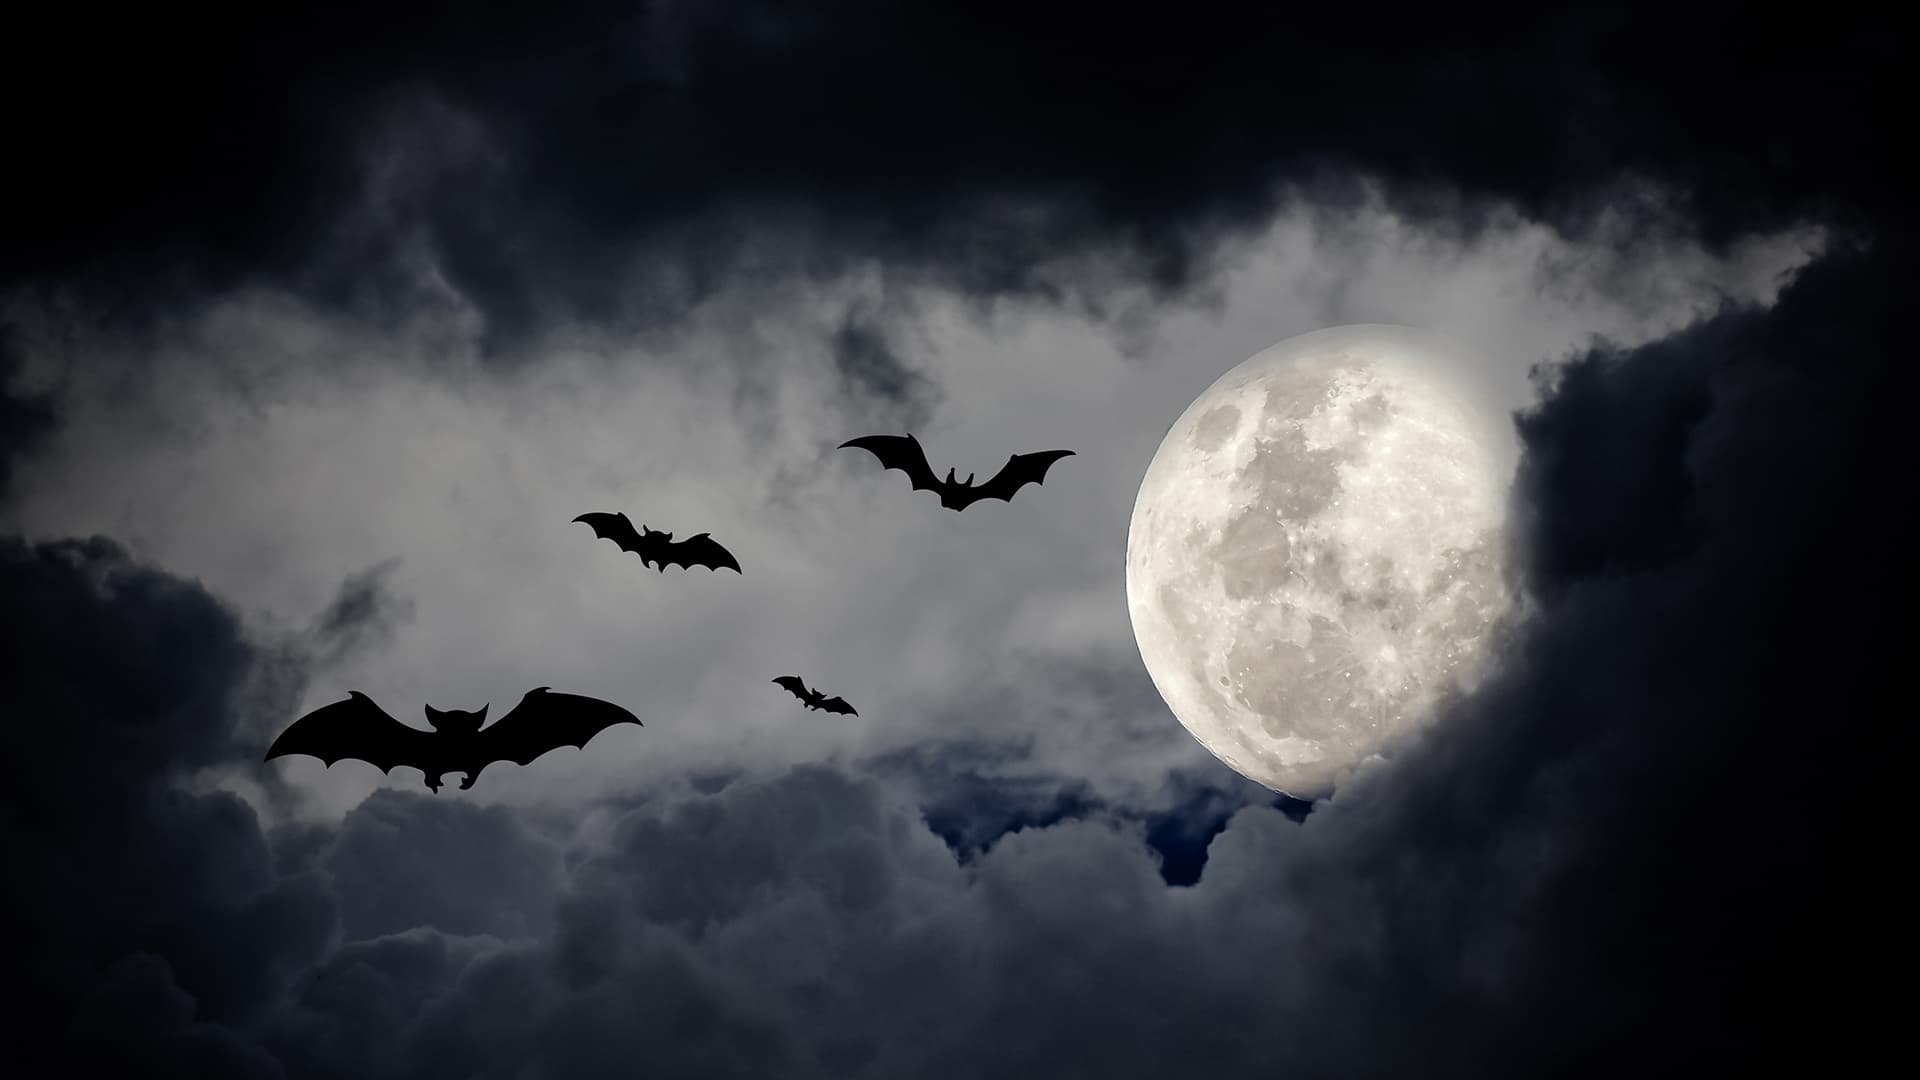 Bat silhouettes flying against a cloudy full moon